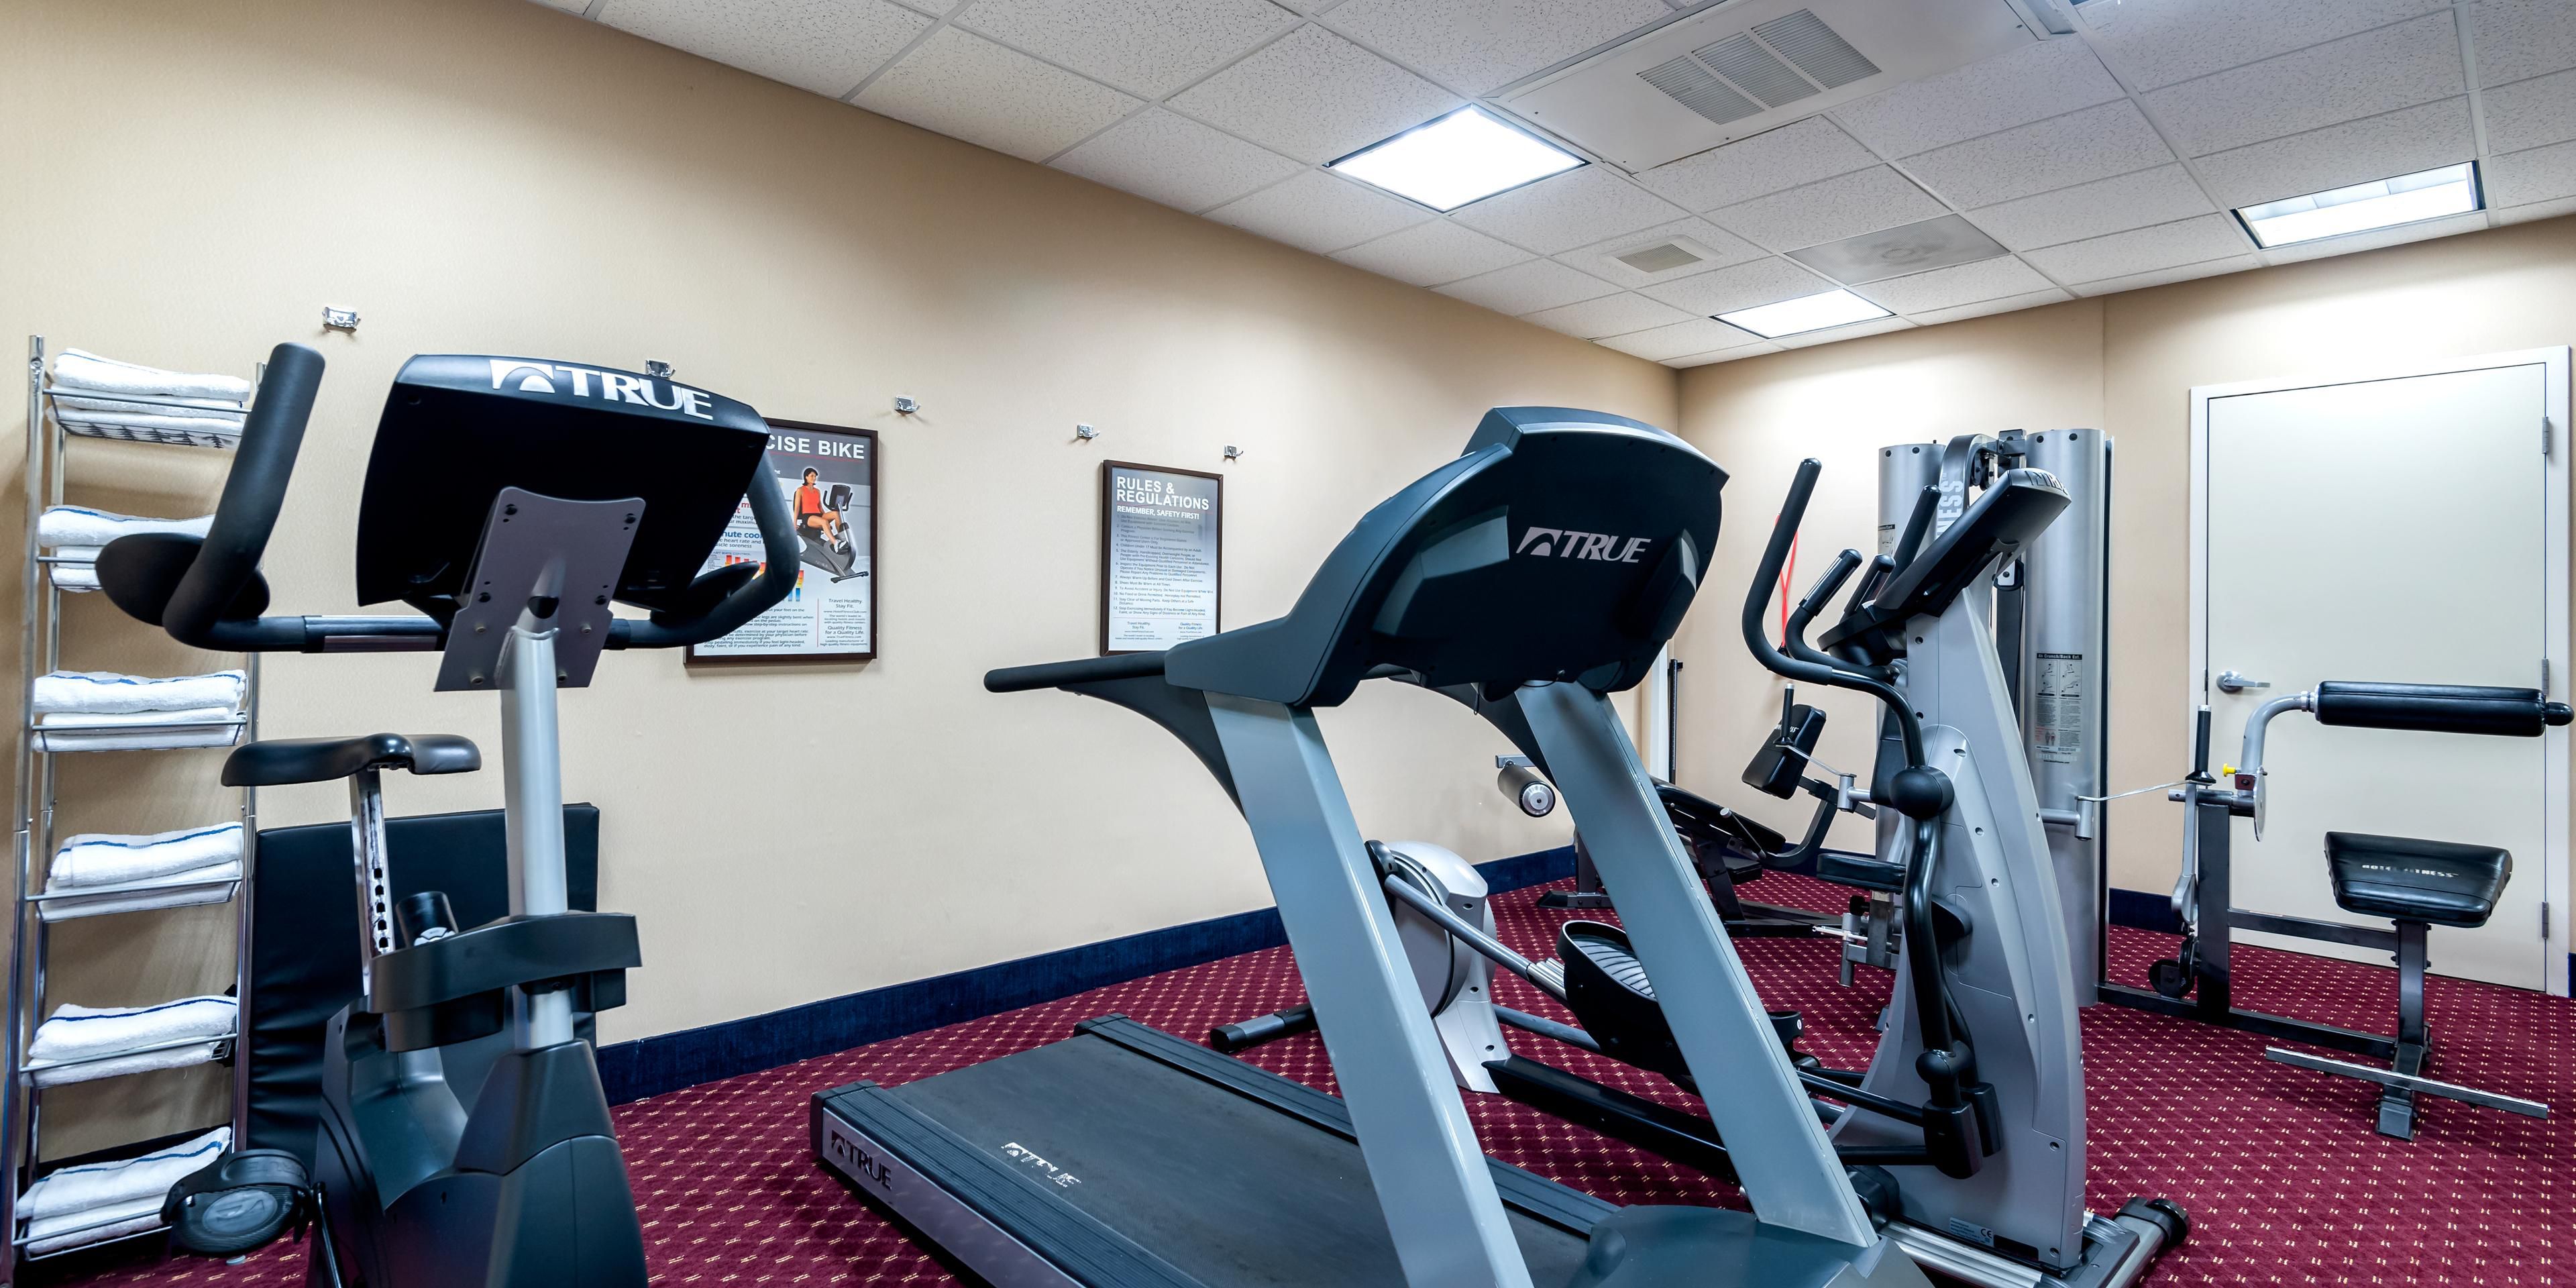 Get your sweat on in our complimentary, fully equipped Fitness Center with treadmill, bike, resistance band, free weights, exercise ball. Open 24-hours.